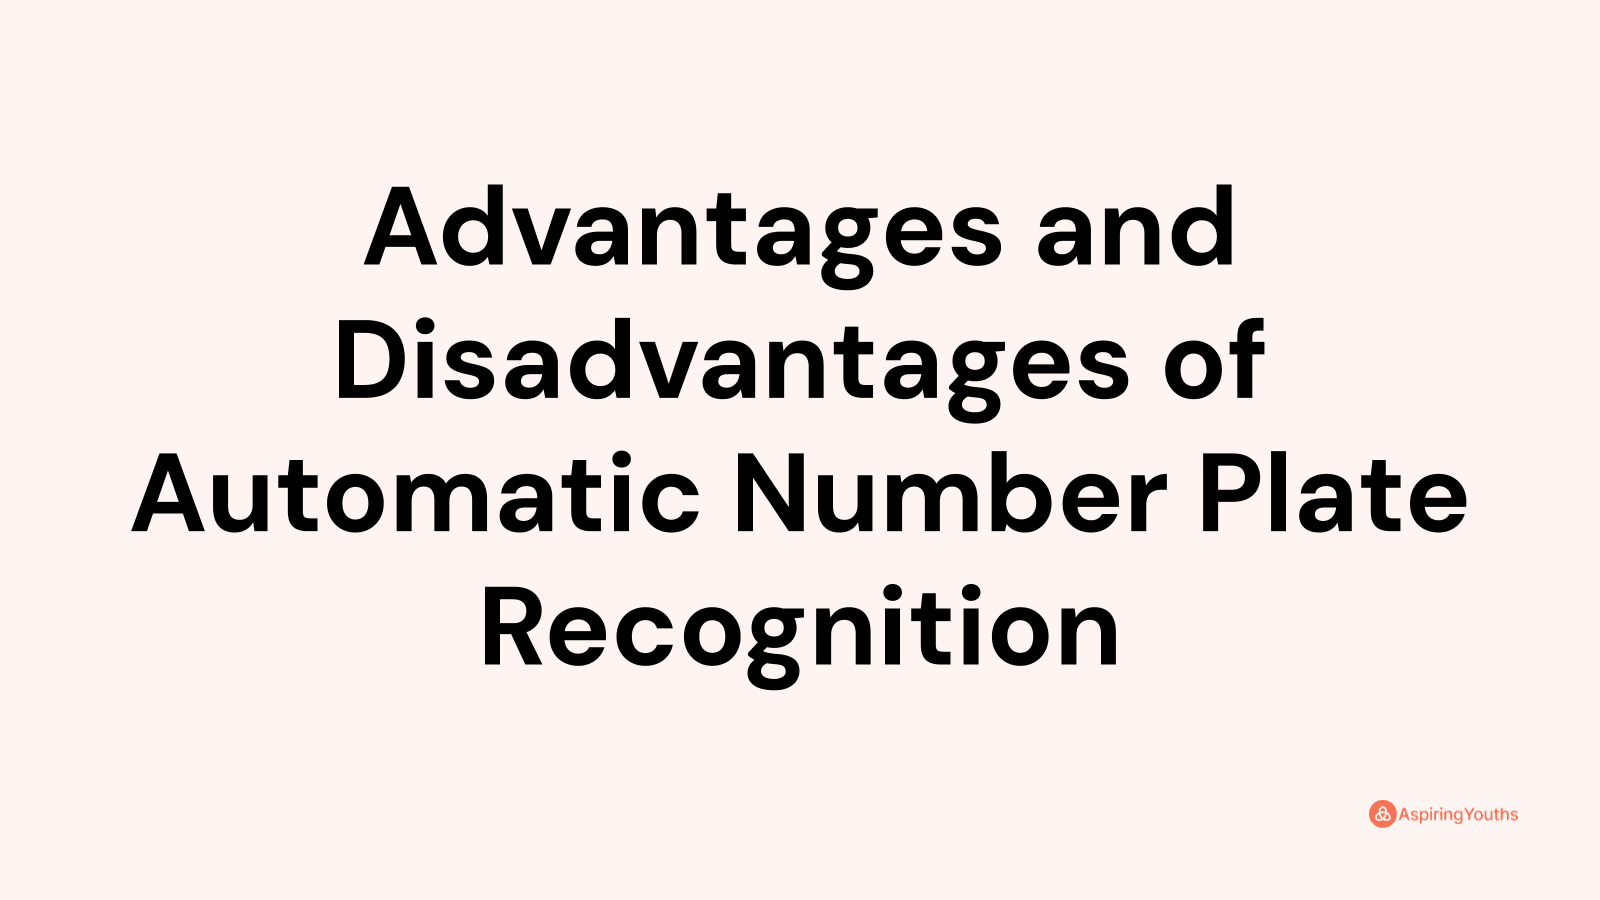 Advantages and disadvantages of Automatic Number Plate Recognition